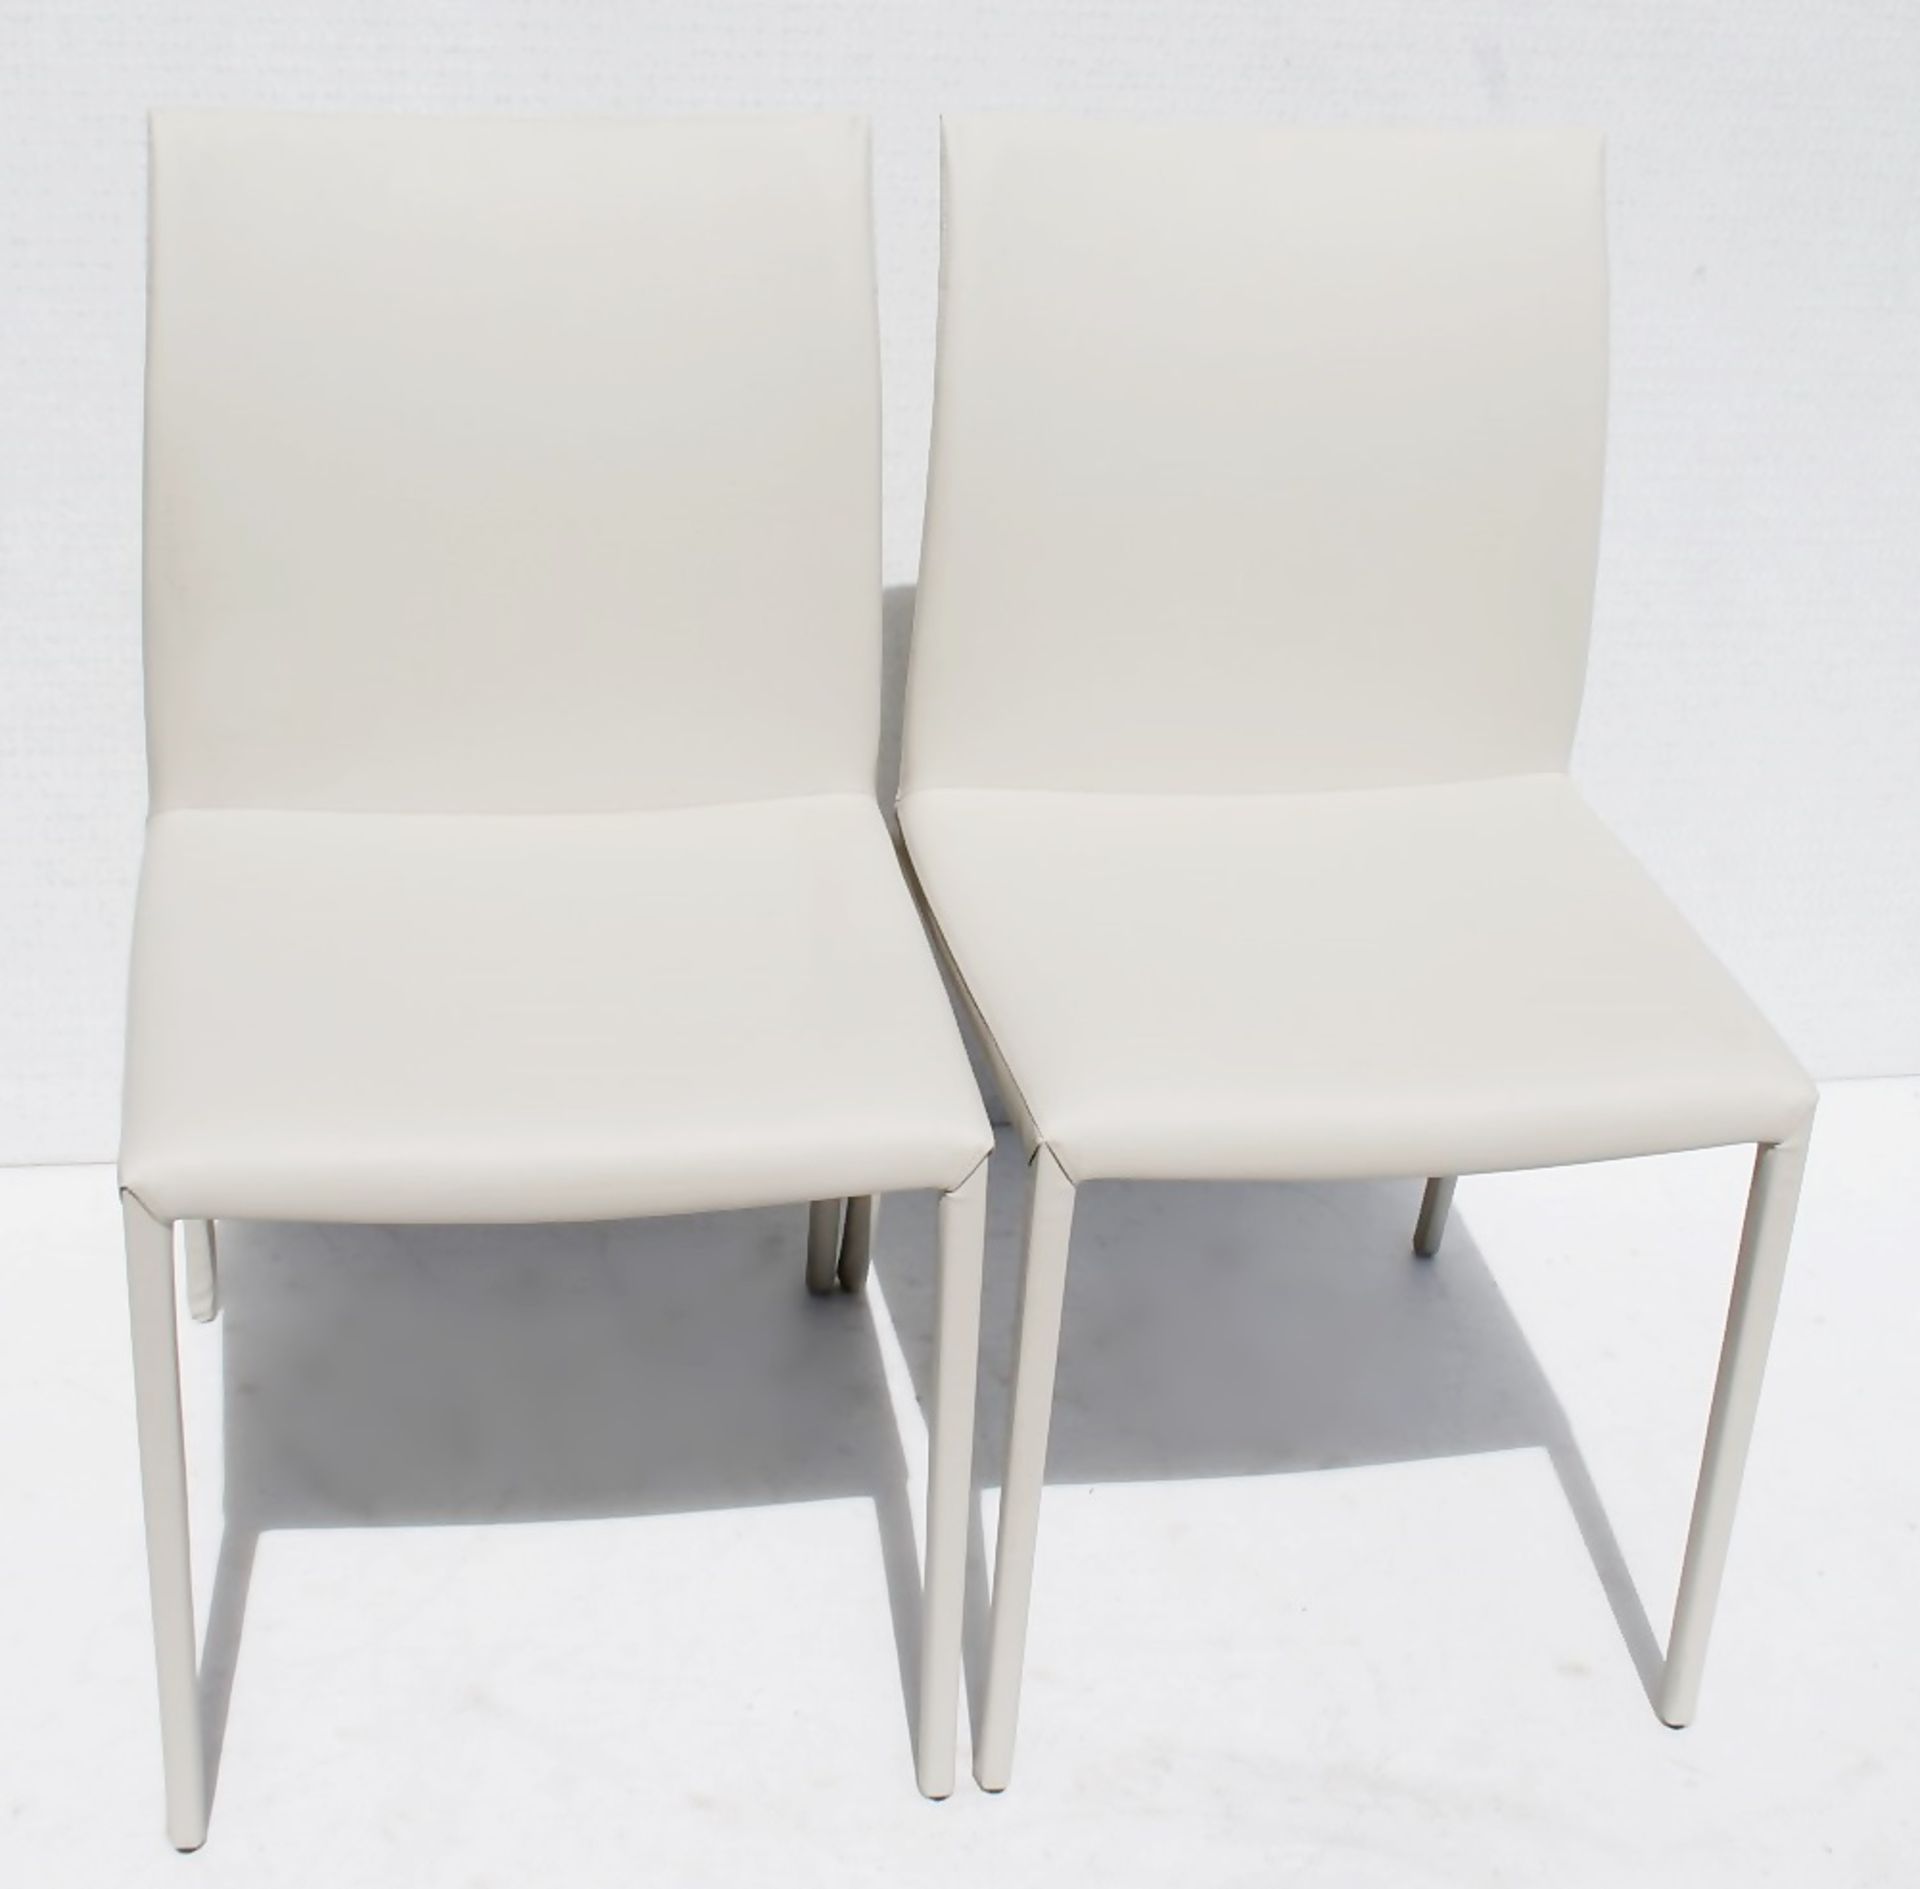 Pair Of CATELLAN 'Norma' Designer Italian Leather Chairs With Curved Backs In A Pale Taupe - Image 4 of 6